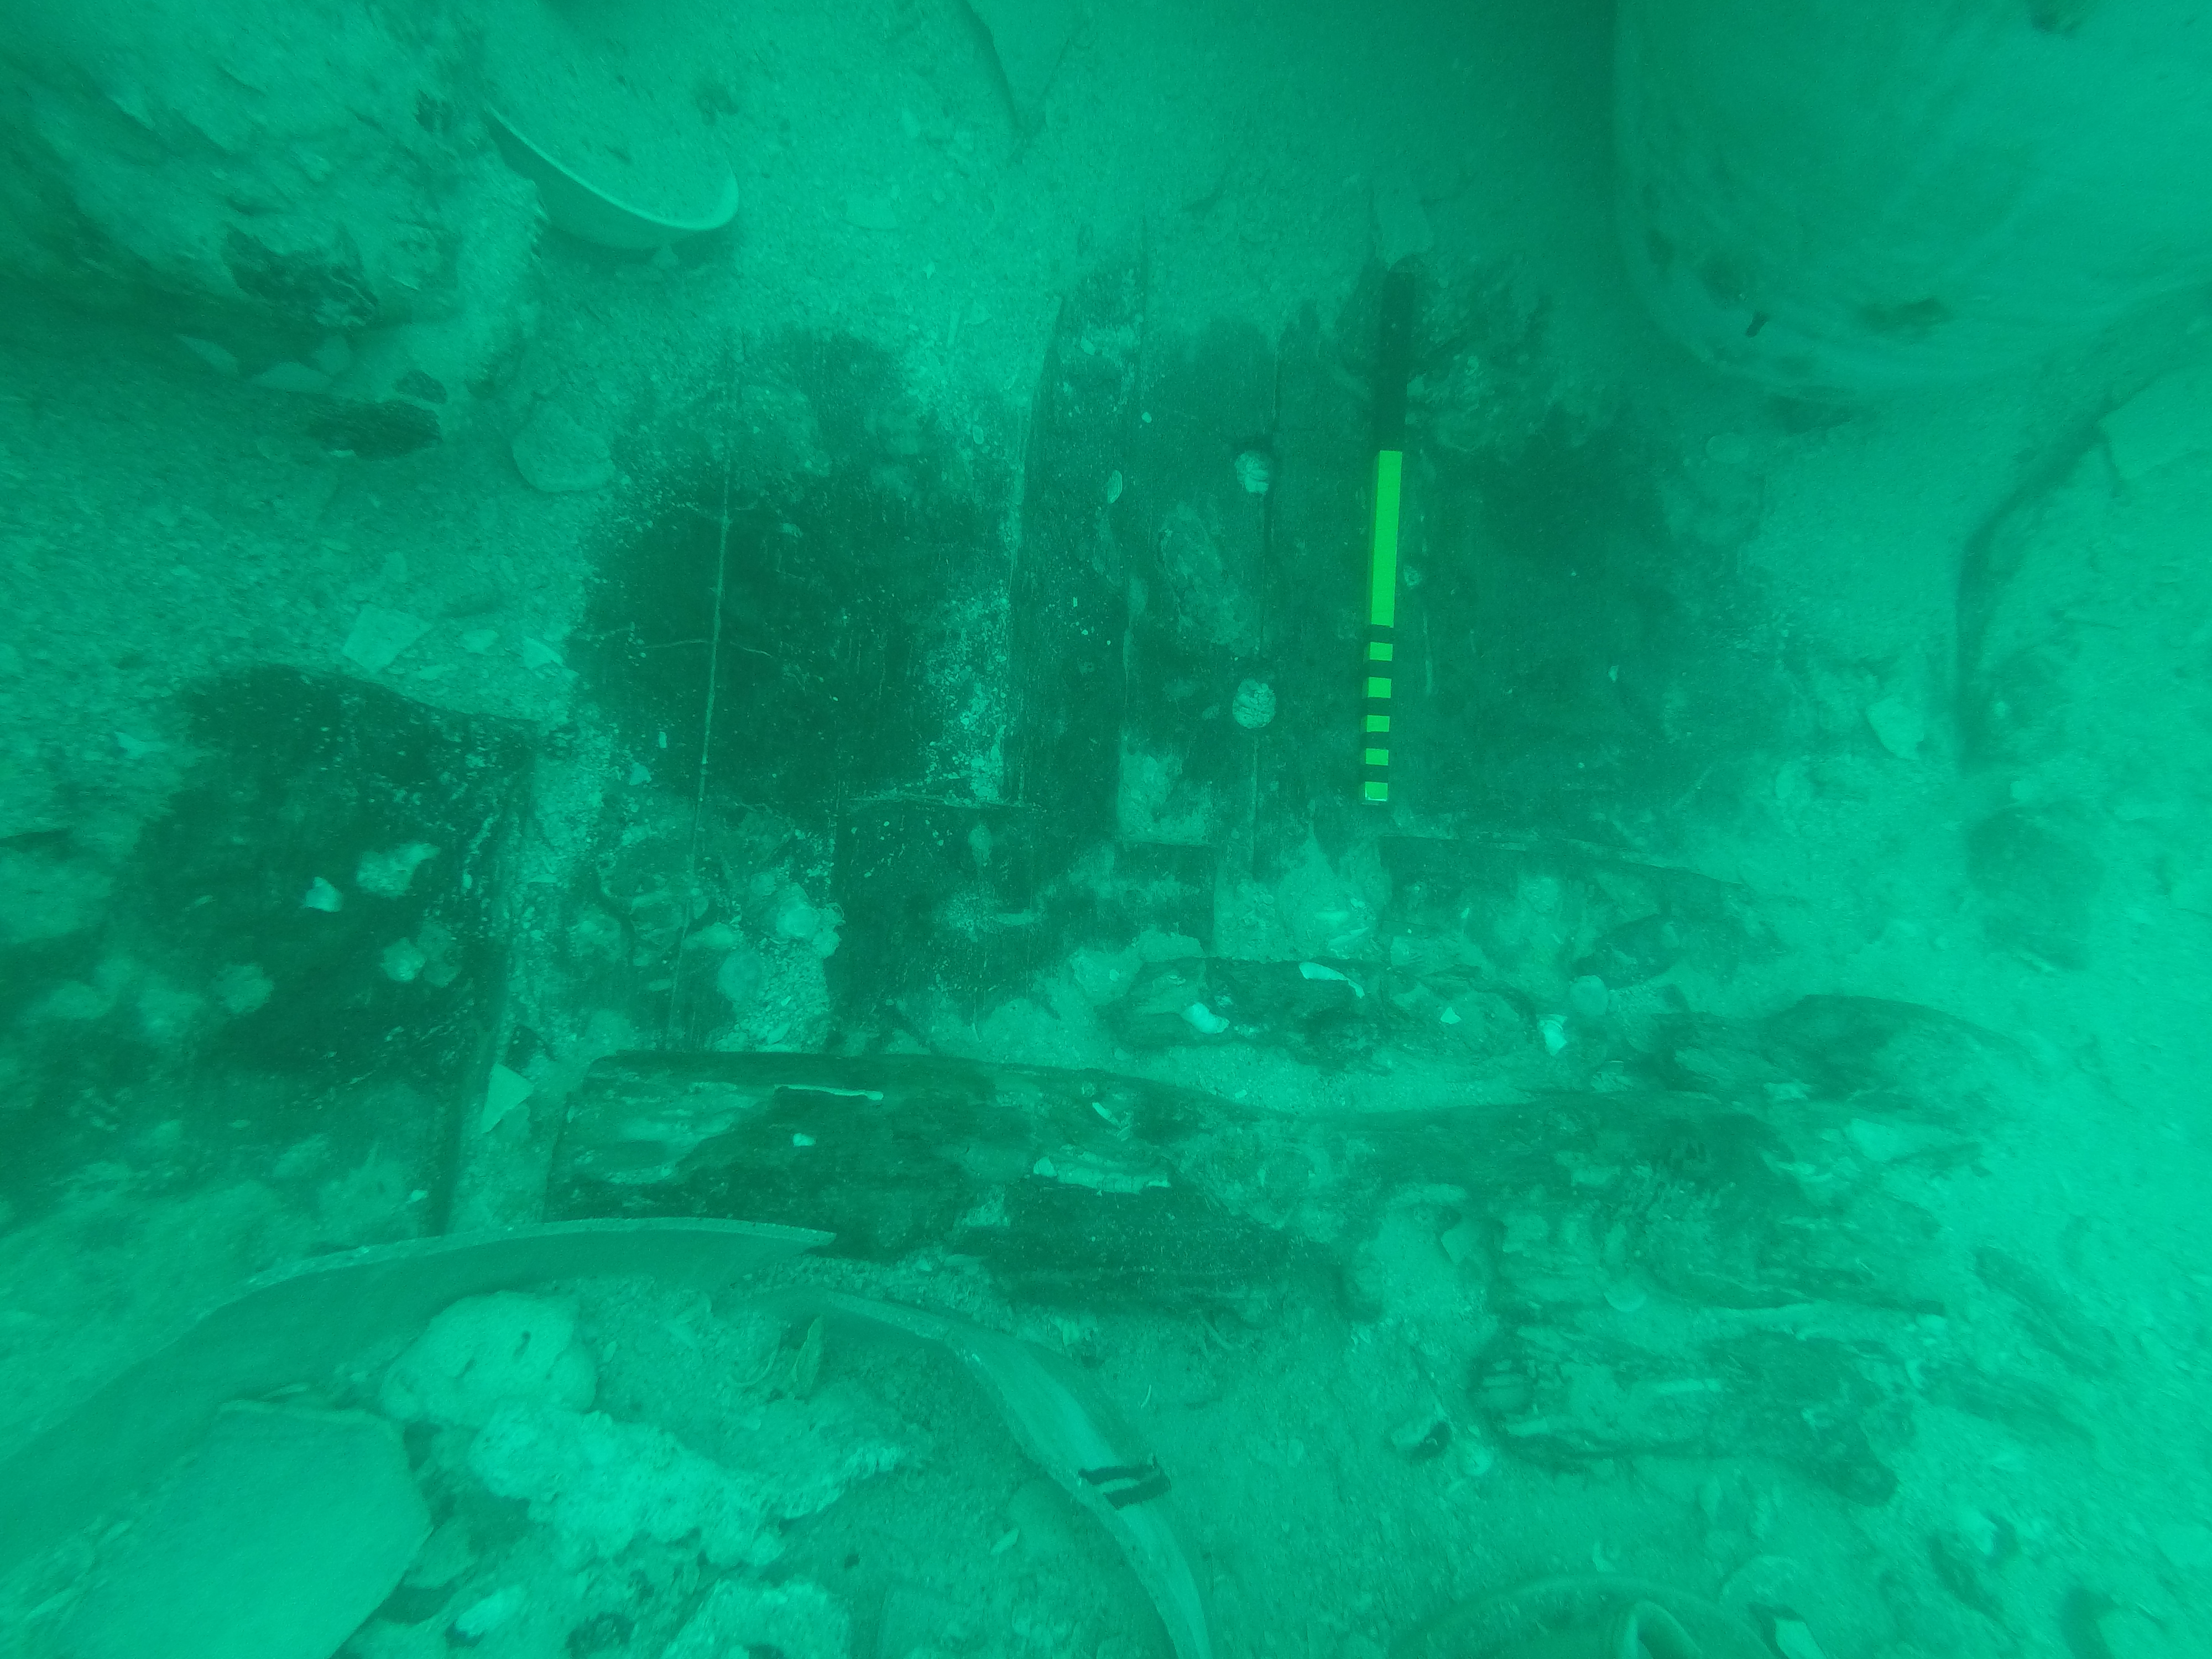 Plan view of a frame overlying planks with lugs on the Flying Fish Wreck (M. Flecker).